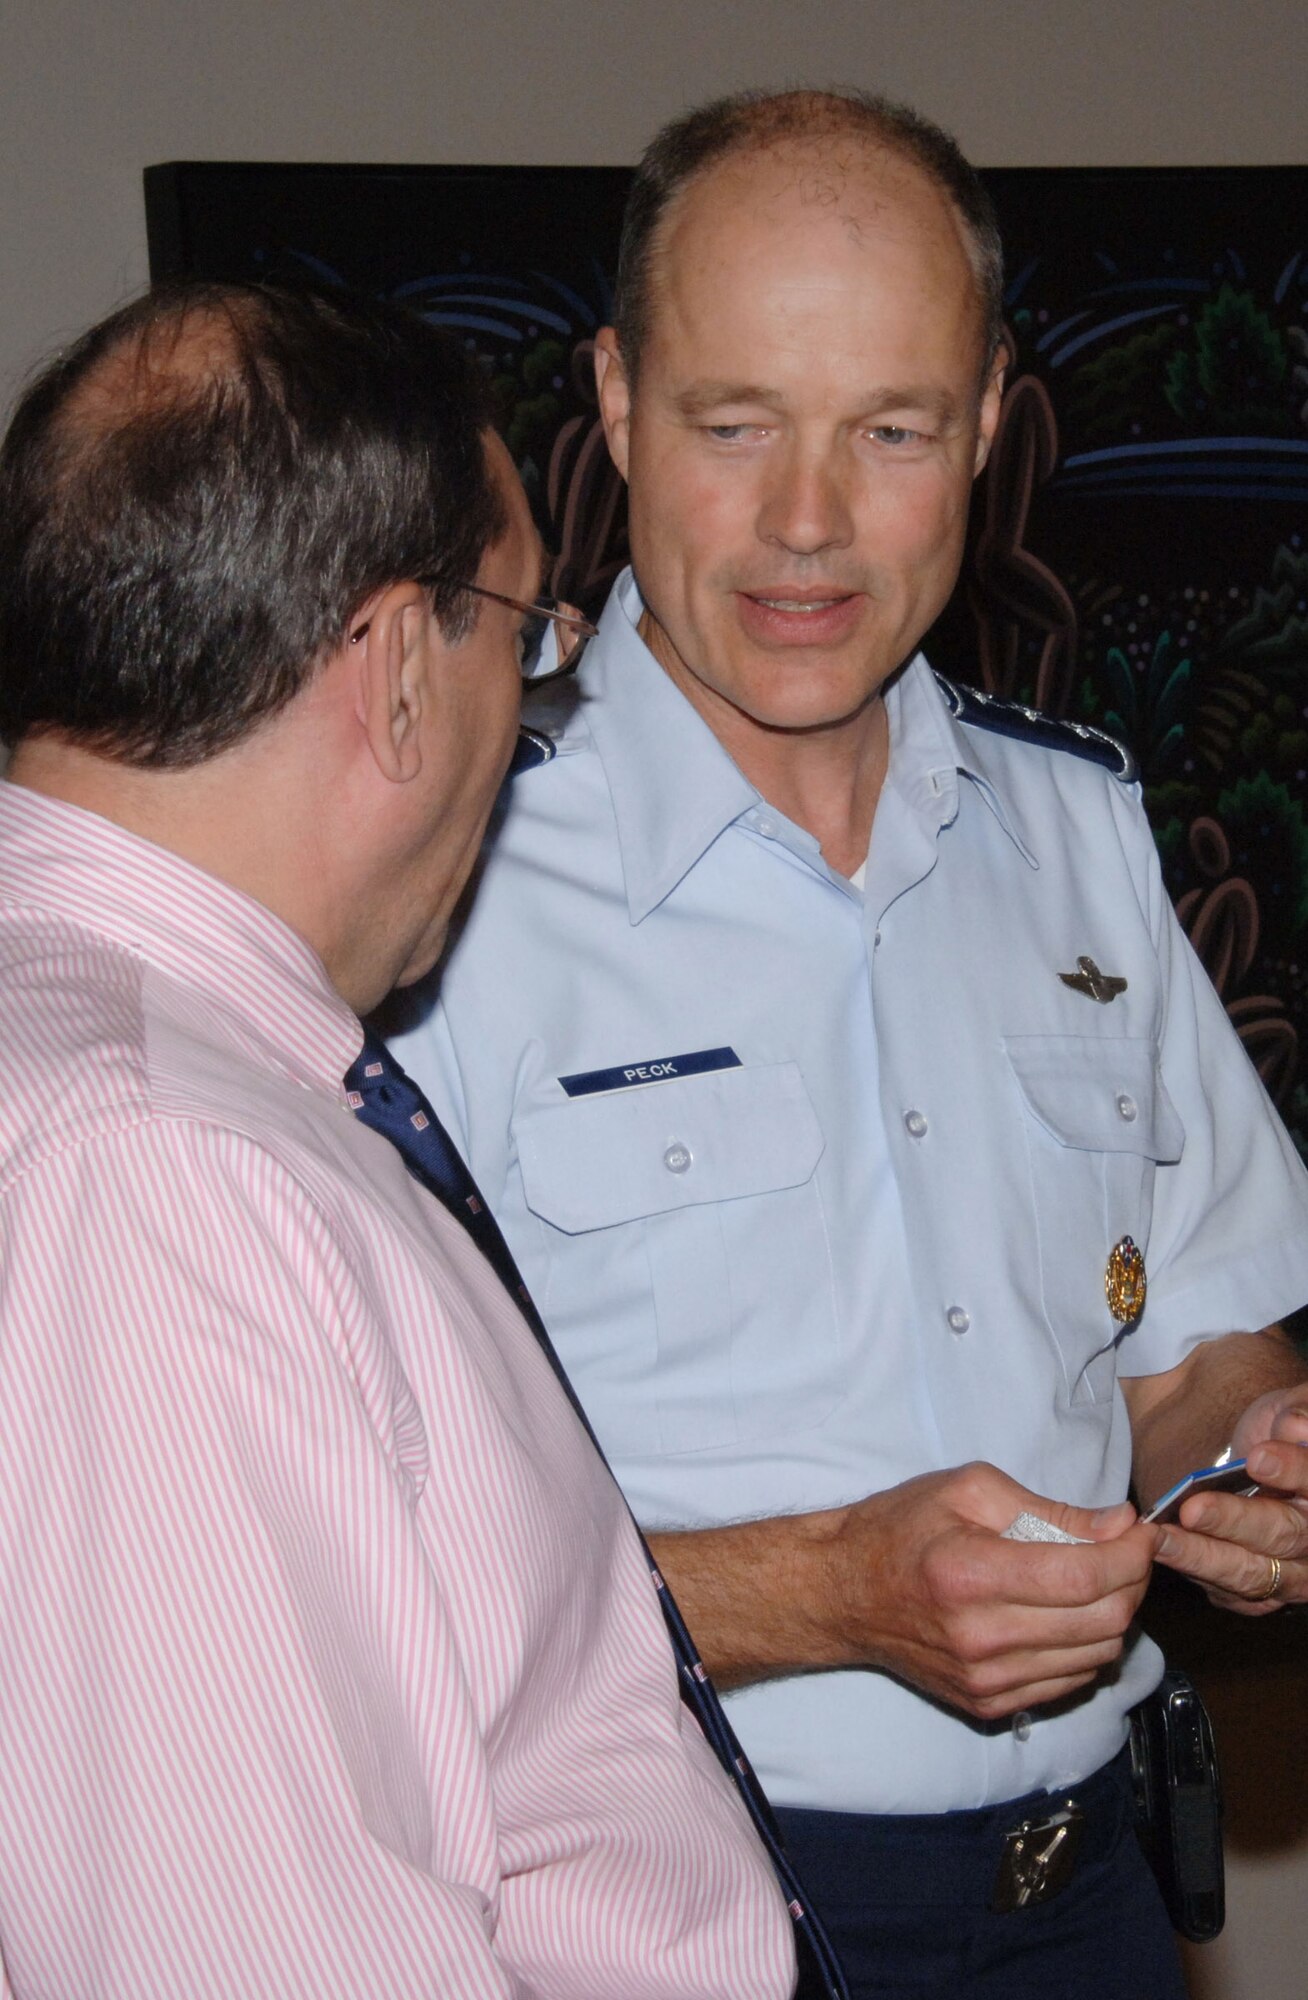 Air University Commander, Allen. G. Peck (right) talks with Mark Johnson, director of the Montgomery Museum of Fine Arts Aug. 20 at the museum's Military Appreciation Night. (U.S. Air Force photo/Melanie Rodgers Cox)